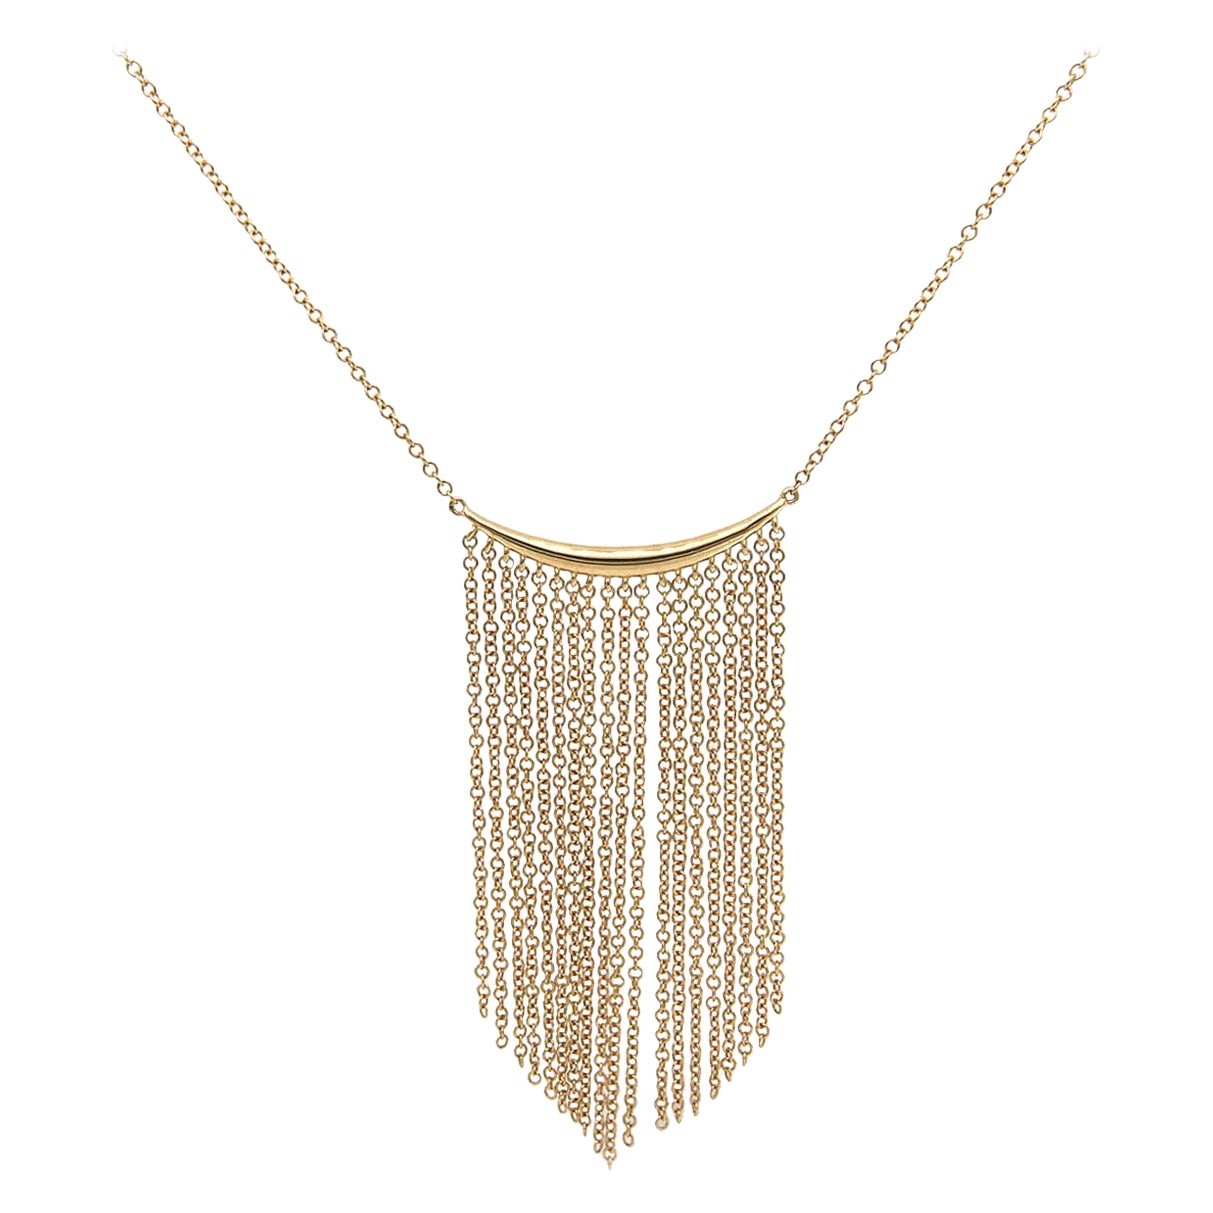 New Gabriel & Co. Curved Bar Multi Strand Fringe Necklace in 14K Yellow Gold For Sale